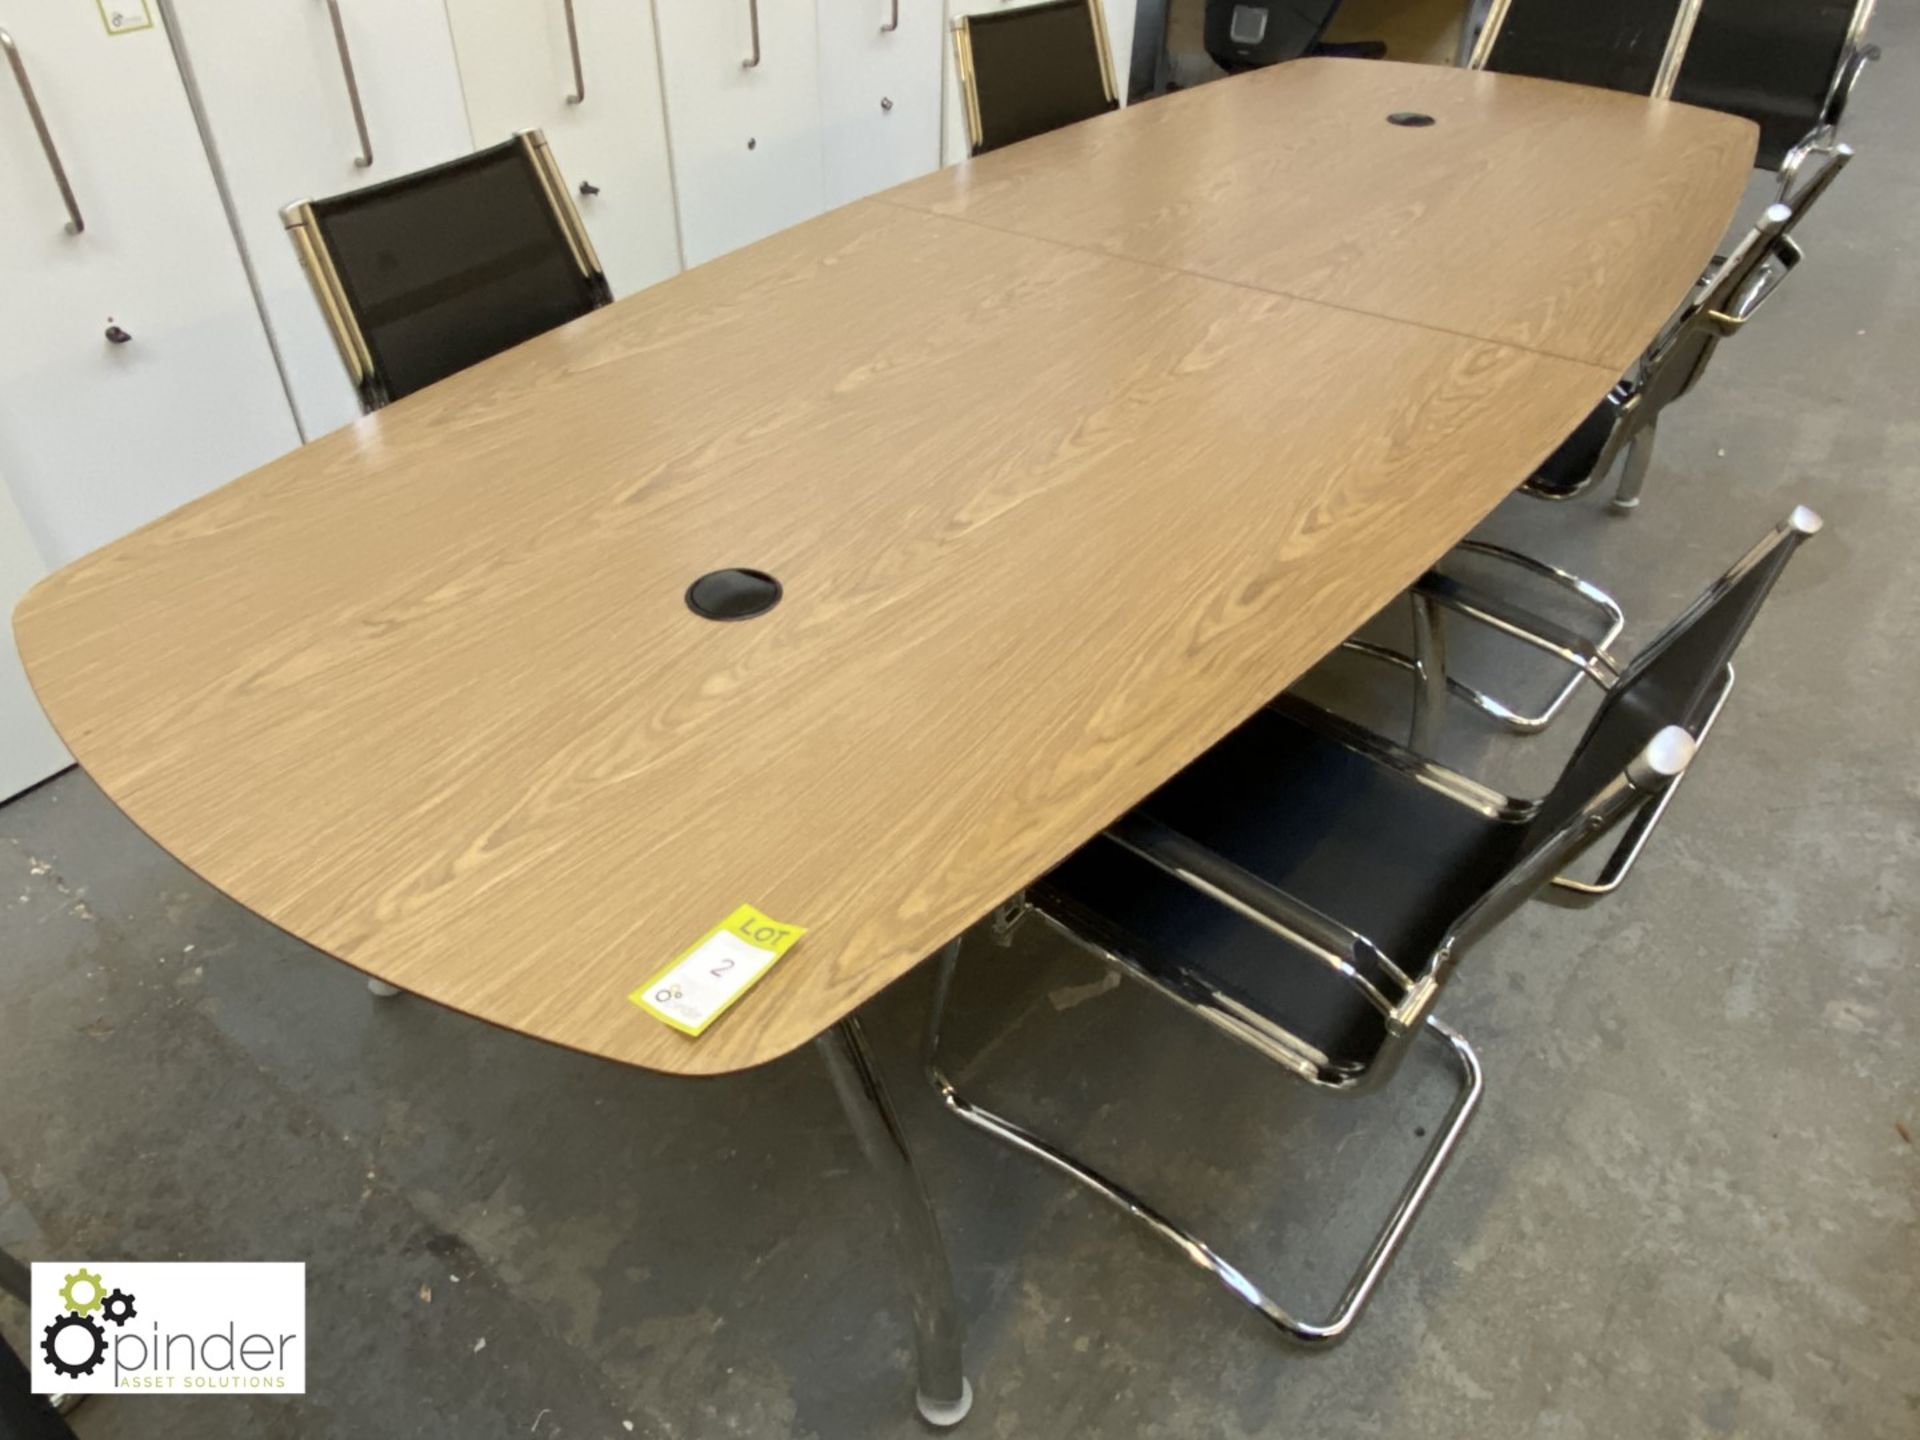 Oak effect 2-section Boardroom Table, 3000mm x 1200mm, with 3 sets chrome legs - Image 3 of 5